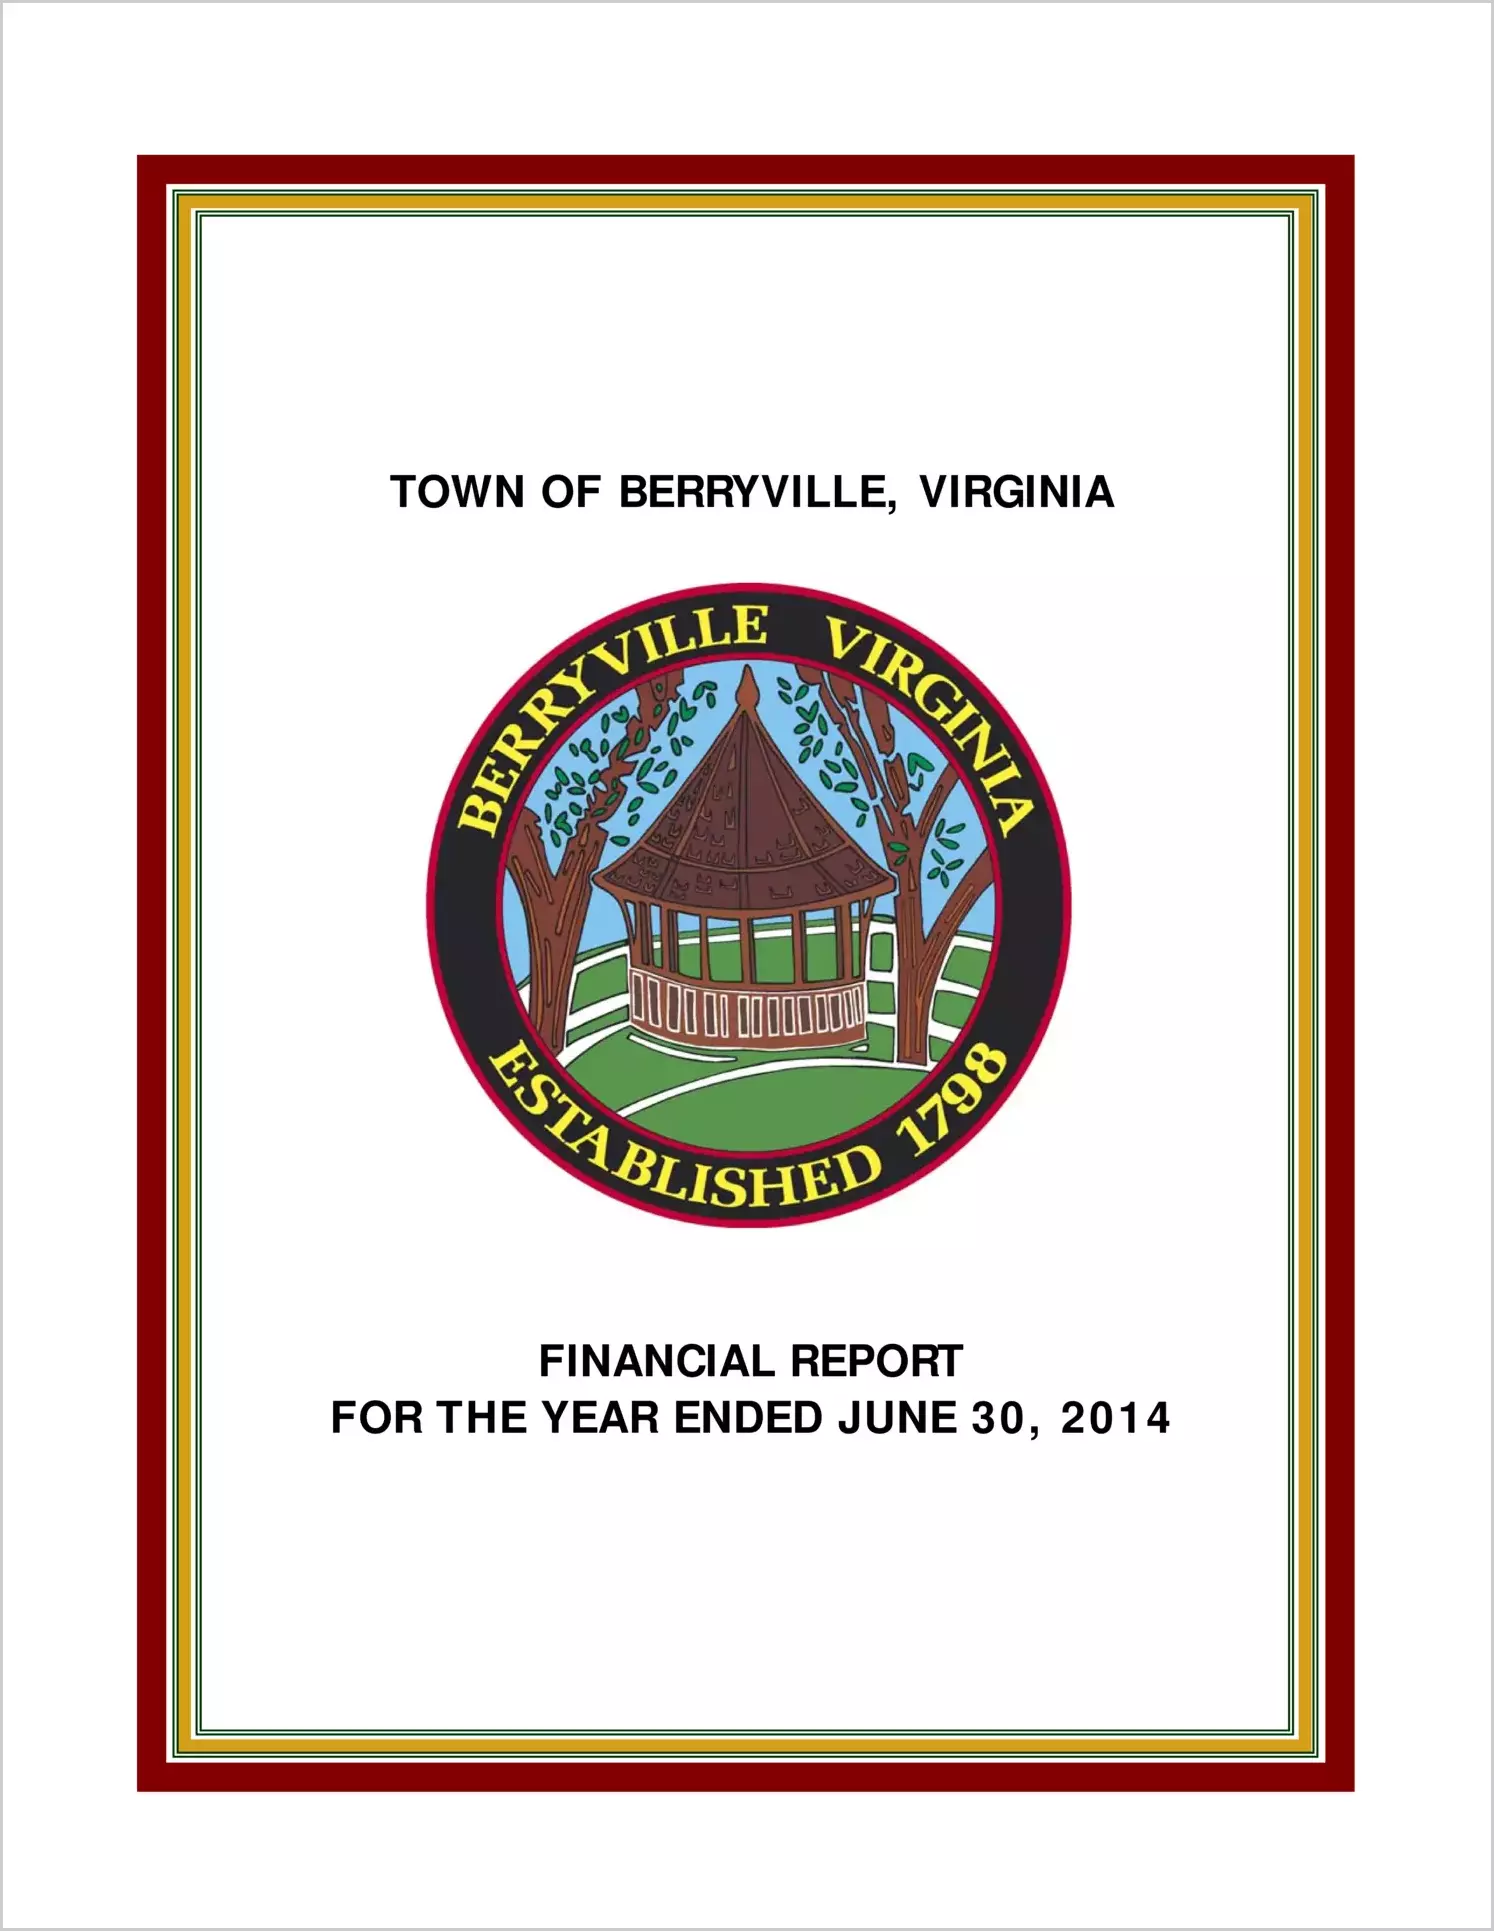 2014 Annual Financial Report for Town of Berryville